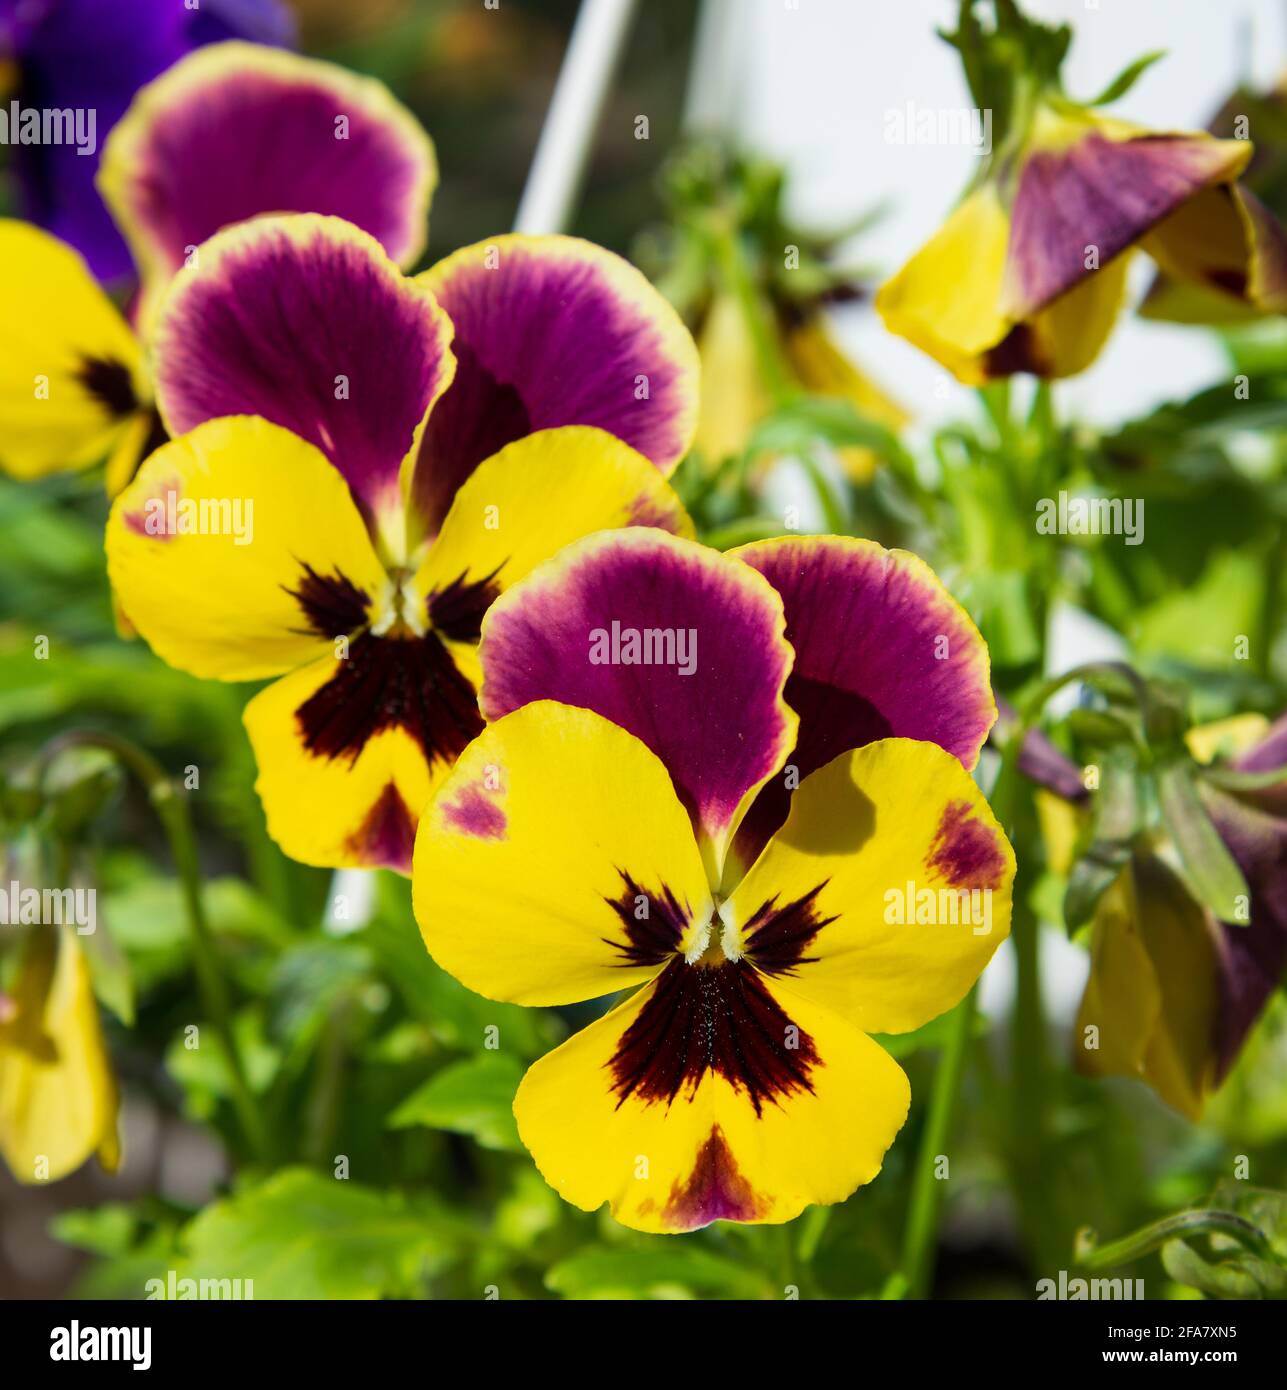 Viola plant in the flower pot, home garden, close up Stock Photo